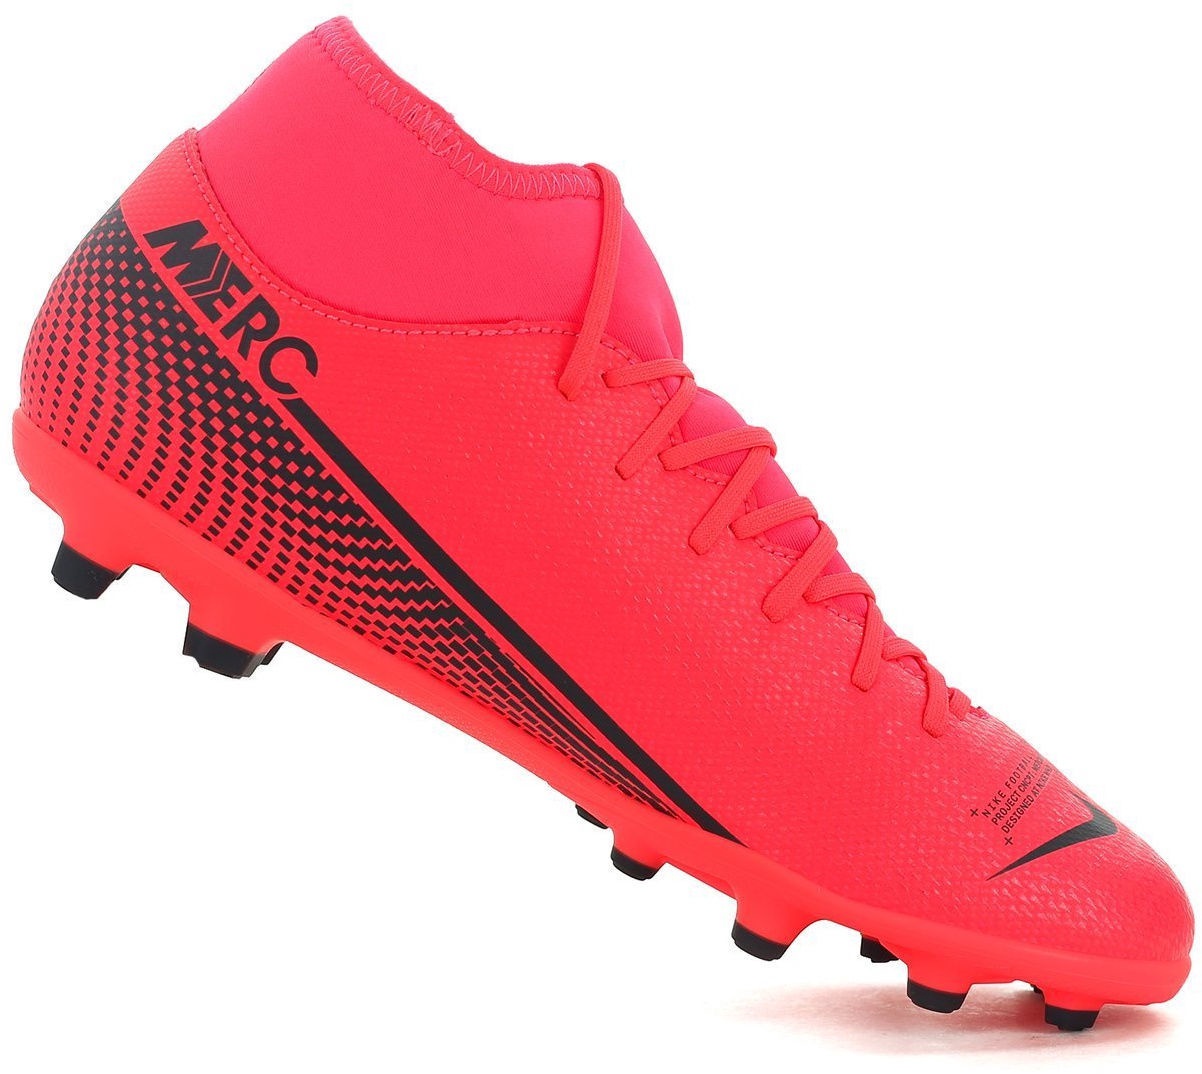  Nike men 's soccer shoes india boots Superfly 7 Club FG MG